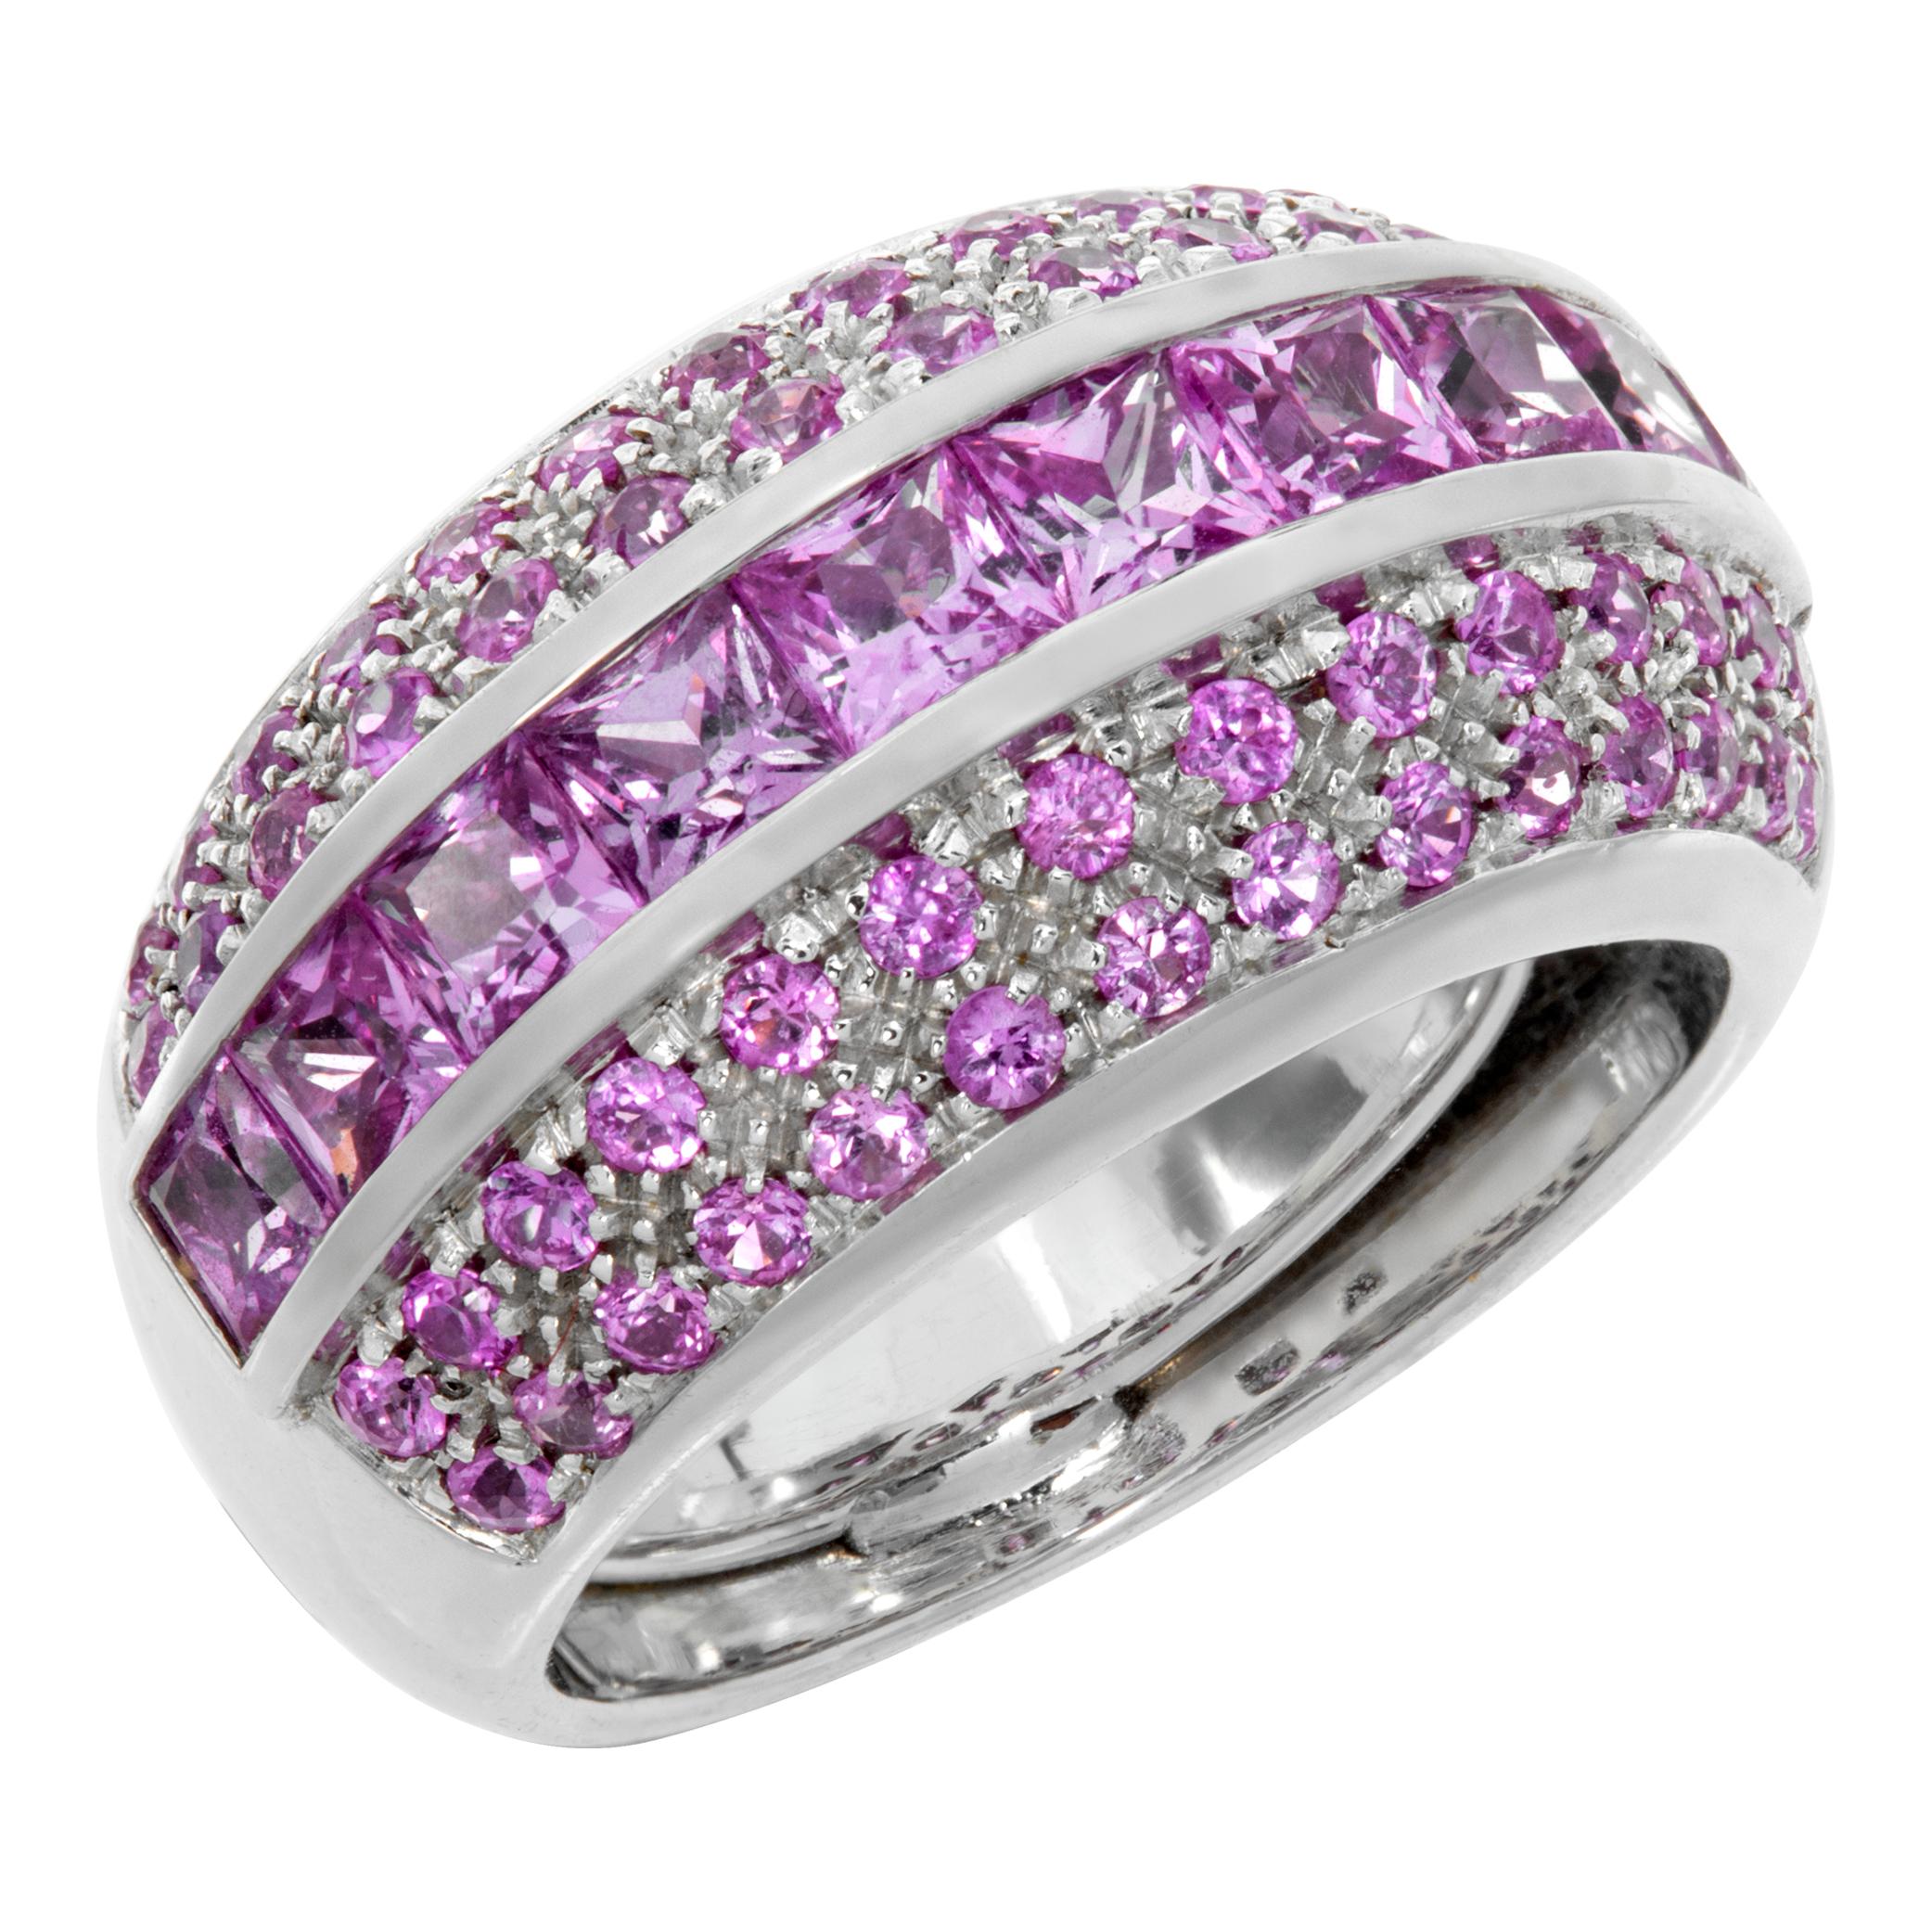 Pink sapphire 18k white gold ring In Excellent Condition For Sale In Surfside, FL